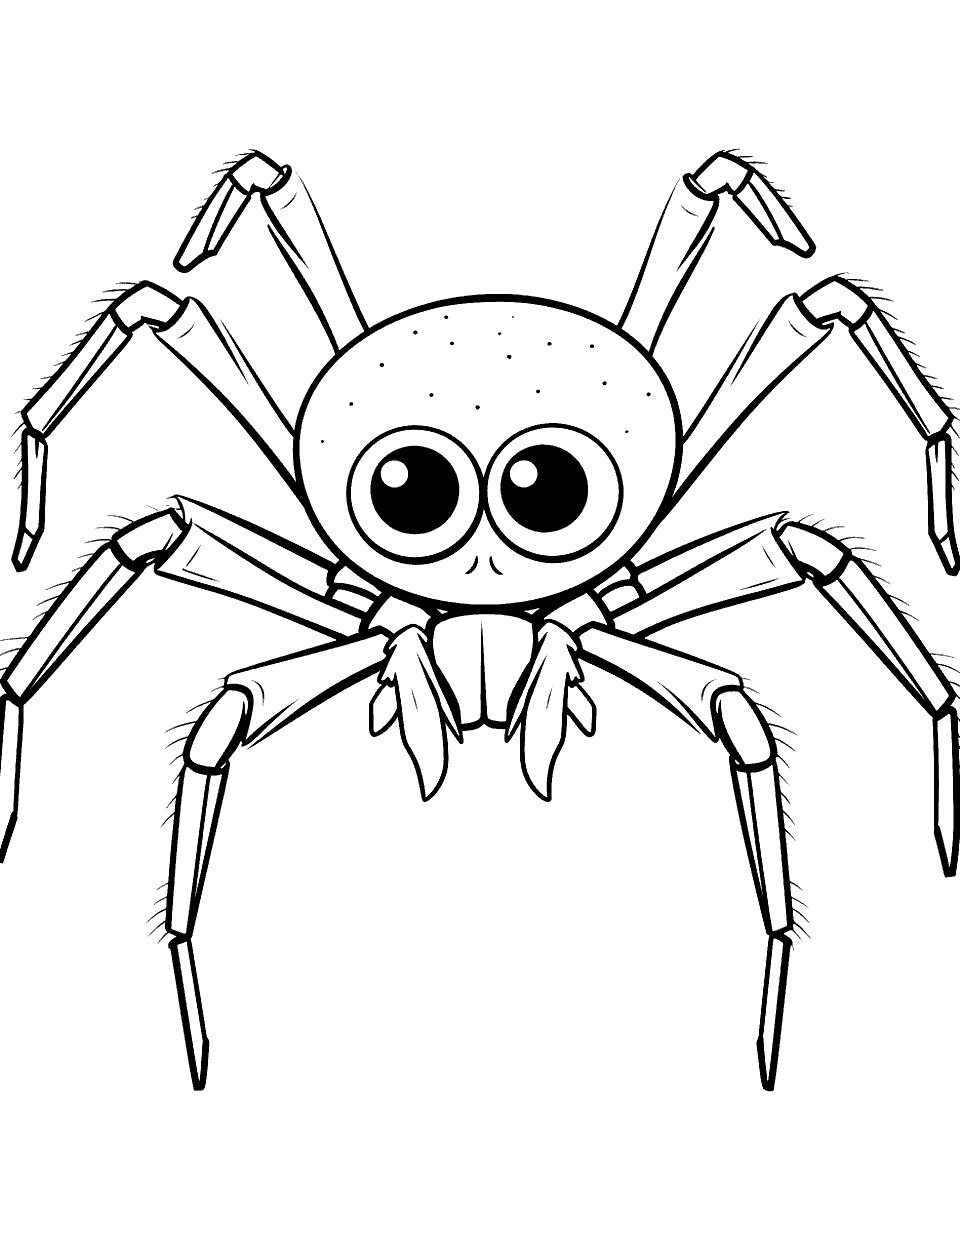 Cool Spider with Big Eyes Coloring Page - A spider with big black eyes looking curiously.